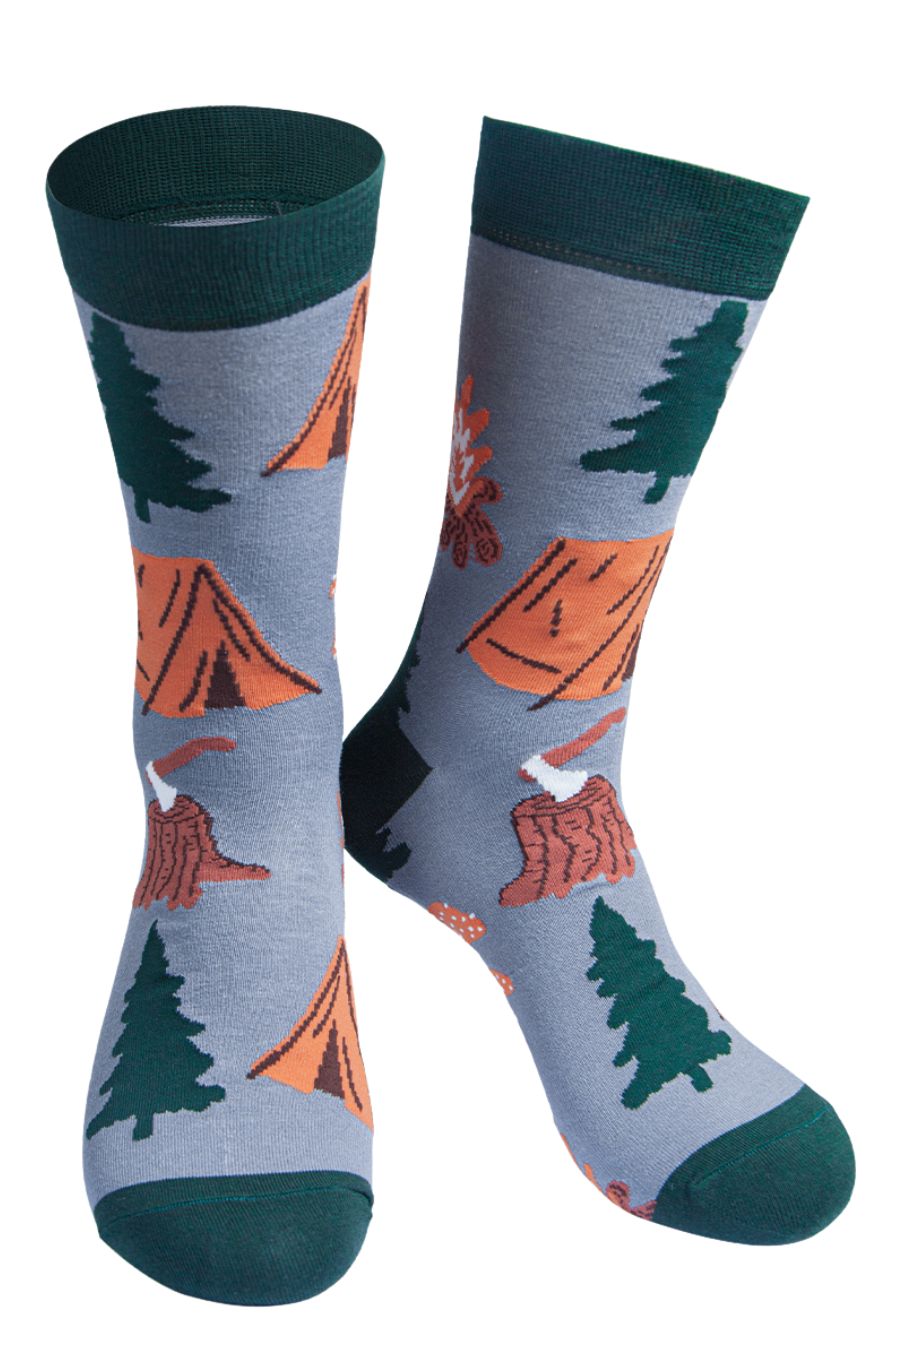 grey, green camping socks featuring tents, trees and tree stumps